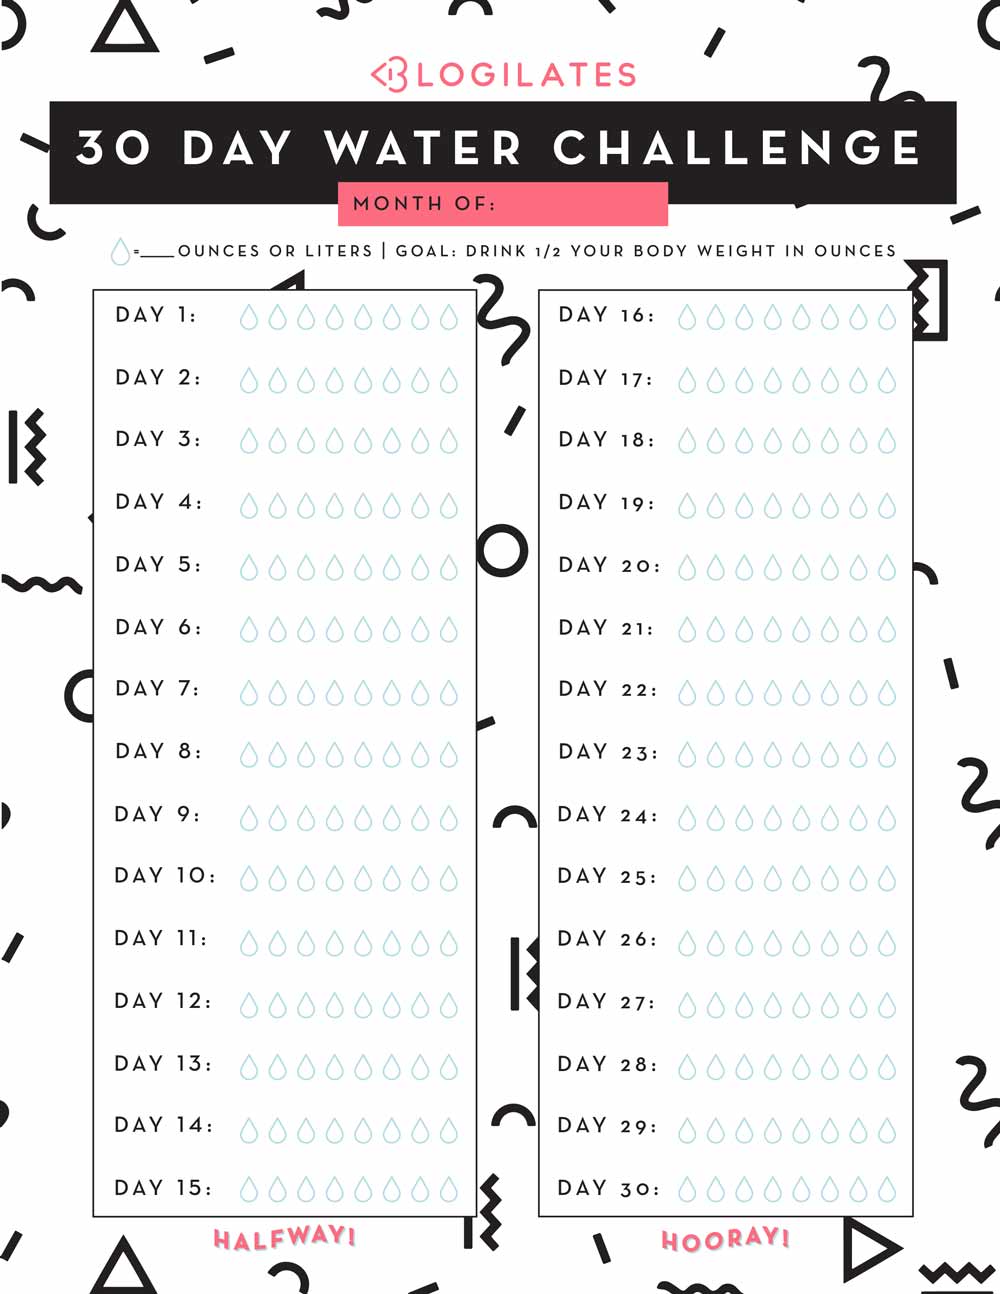 The 30 Day Water Challenge Blogilates